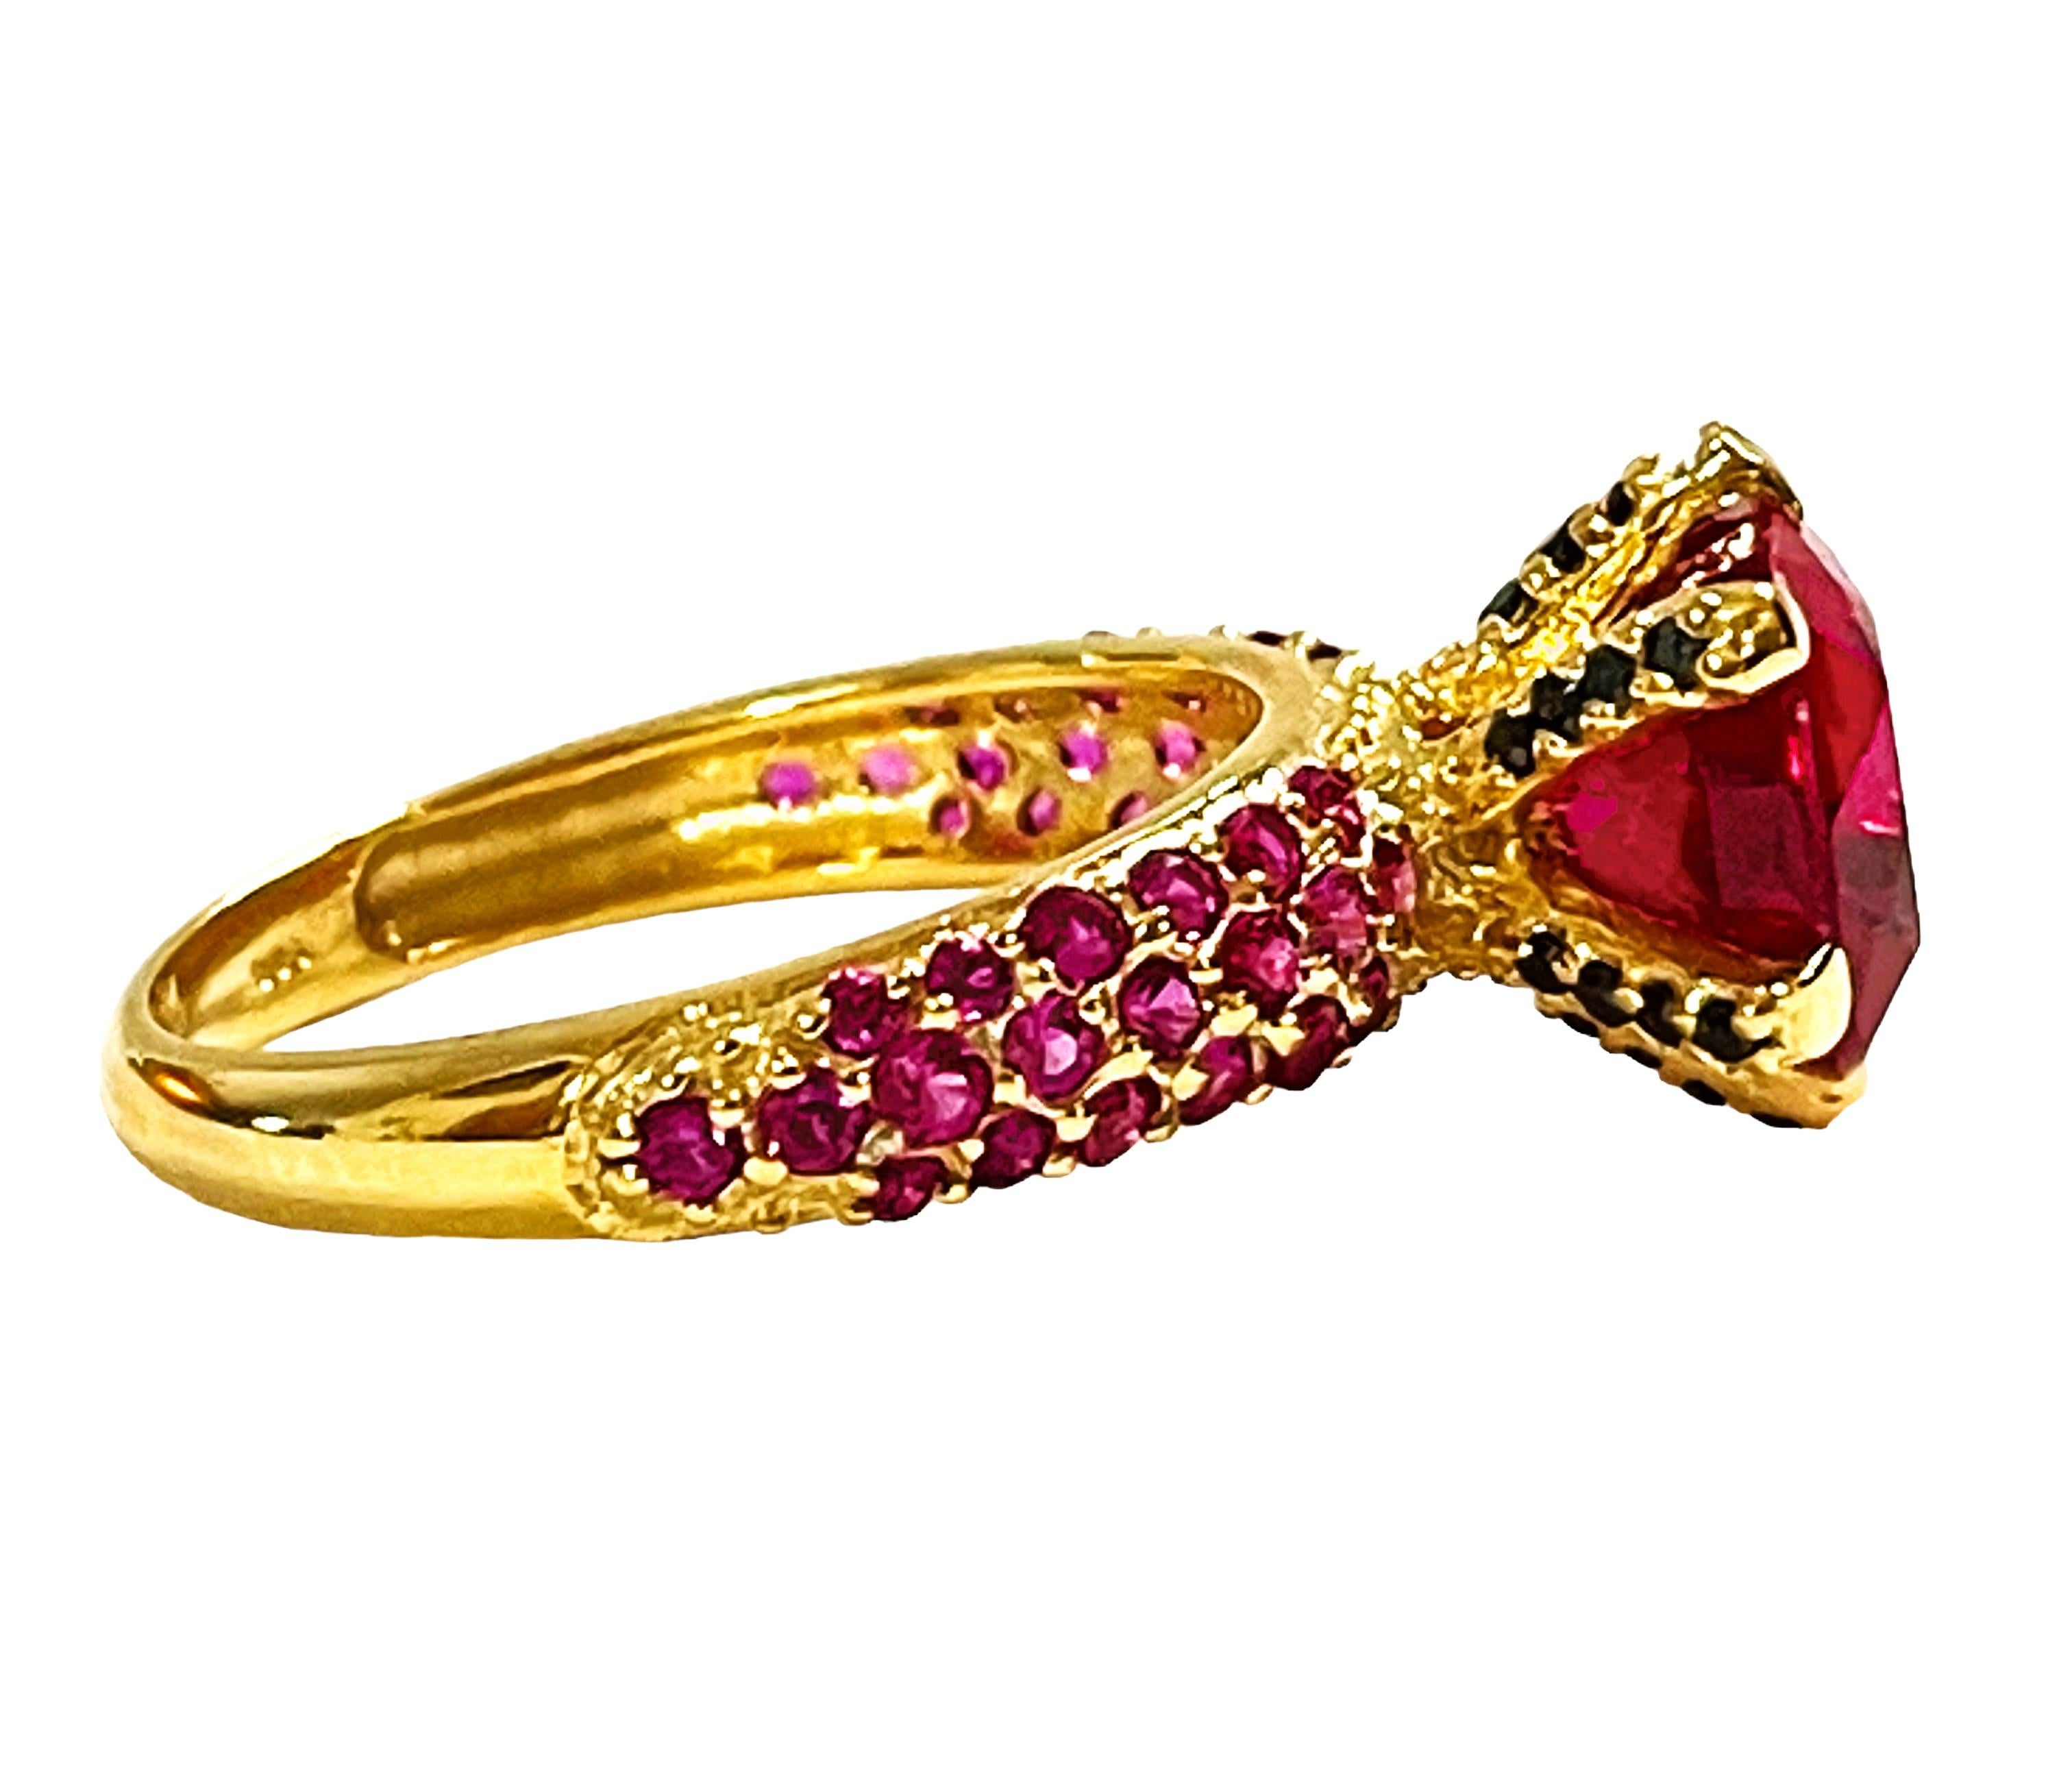 Cushion Cut New African IF 4.0ct Deep Pink Tourmaline & Ruby YGold Plated Sterling Ring